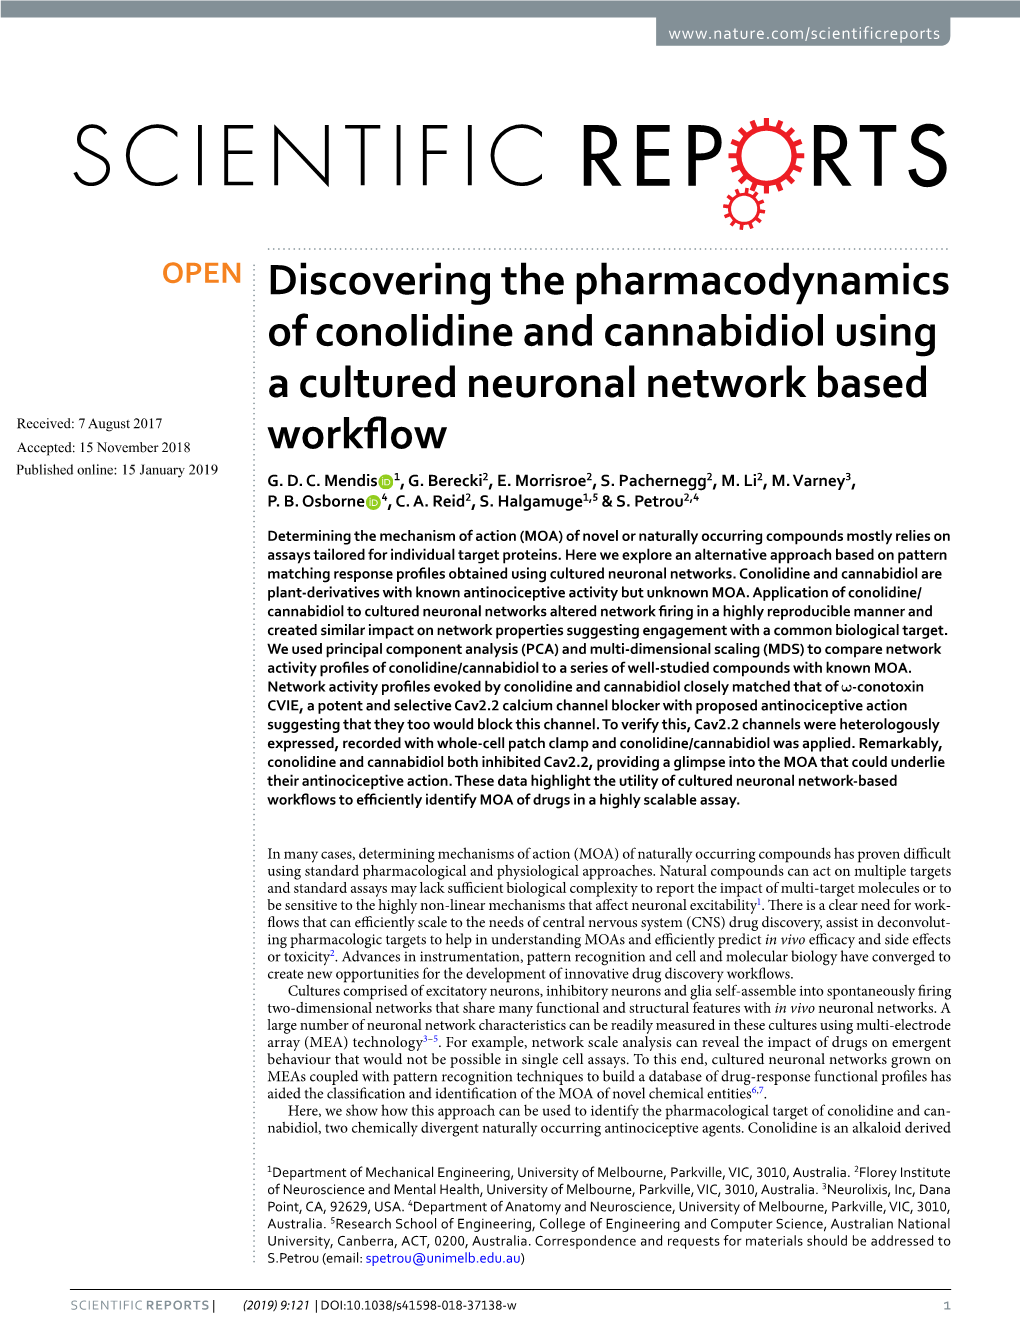 Discovering the Pharmacodynamics of Conolidine and Cannabidiol Using A